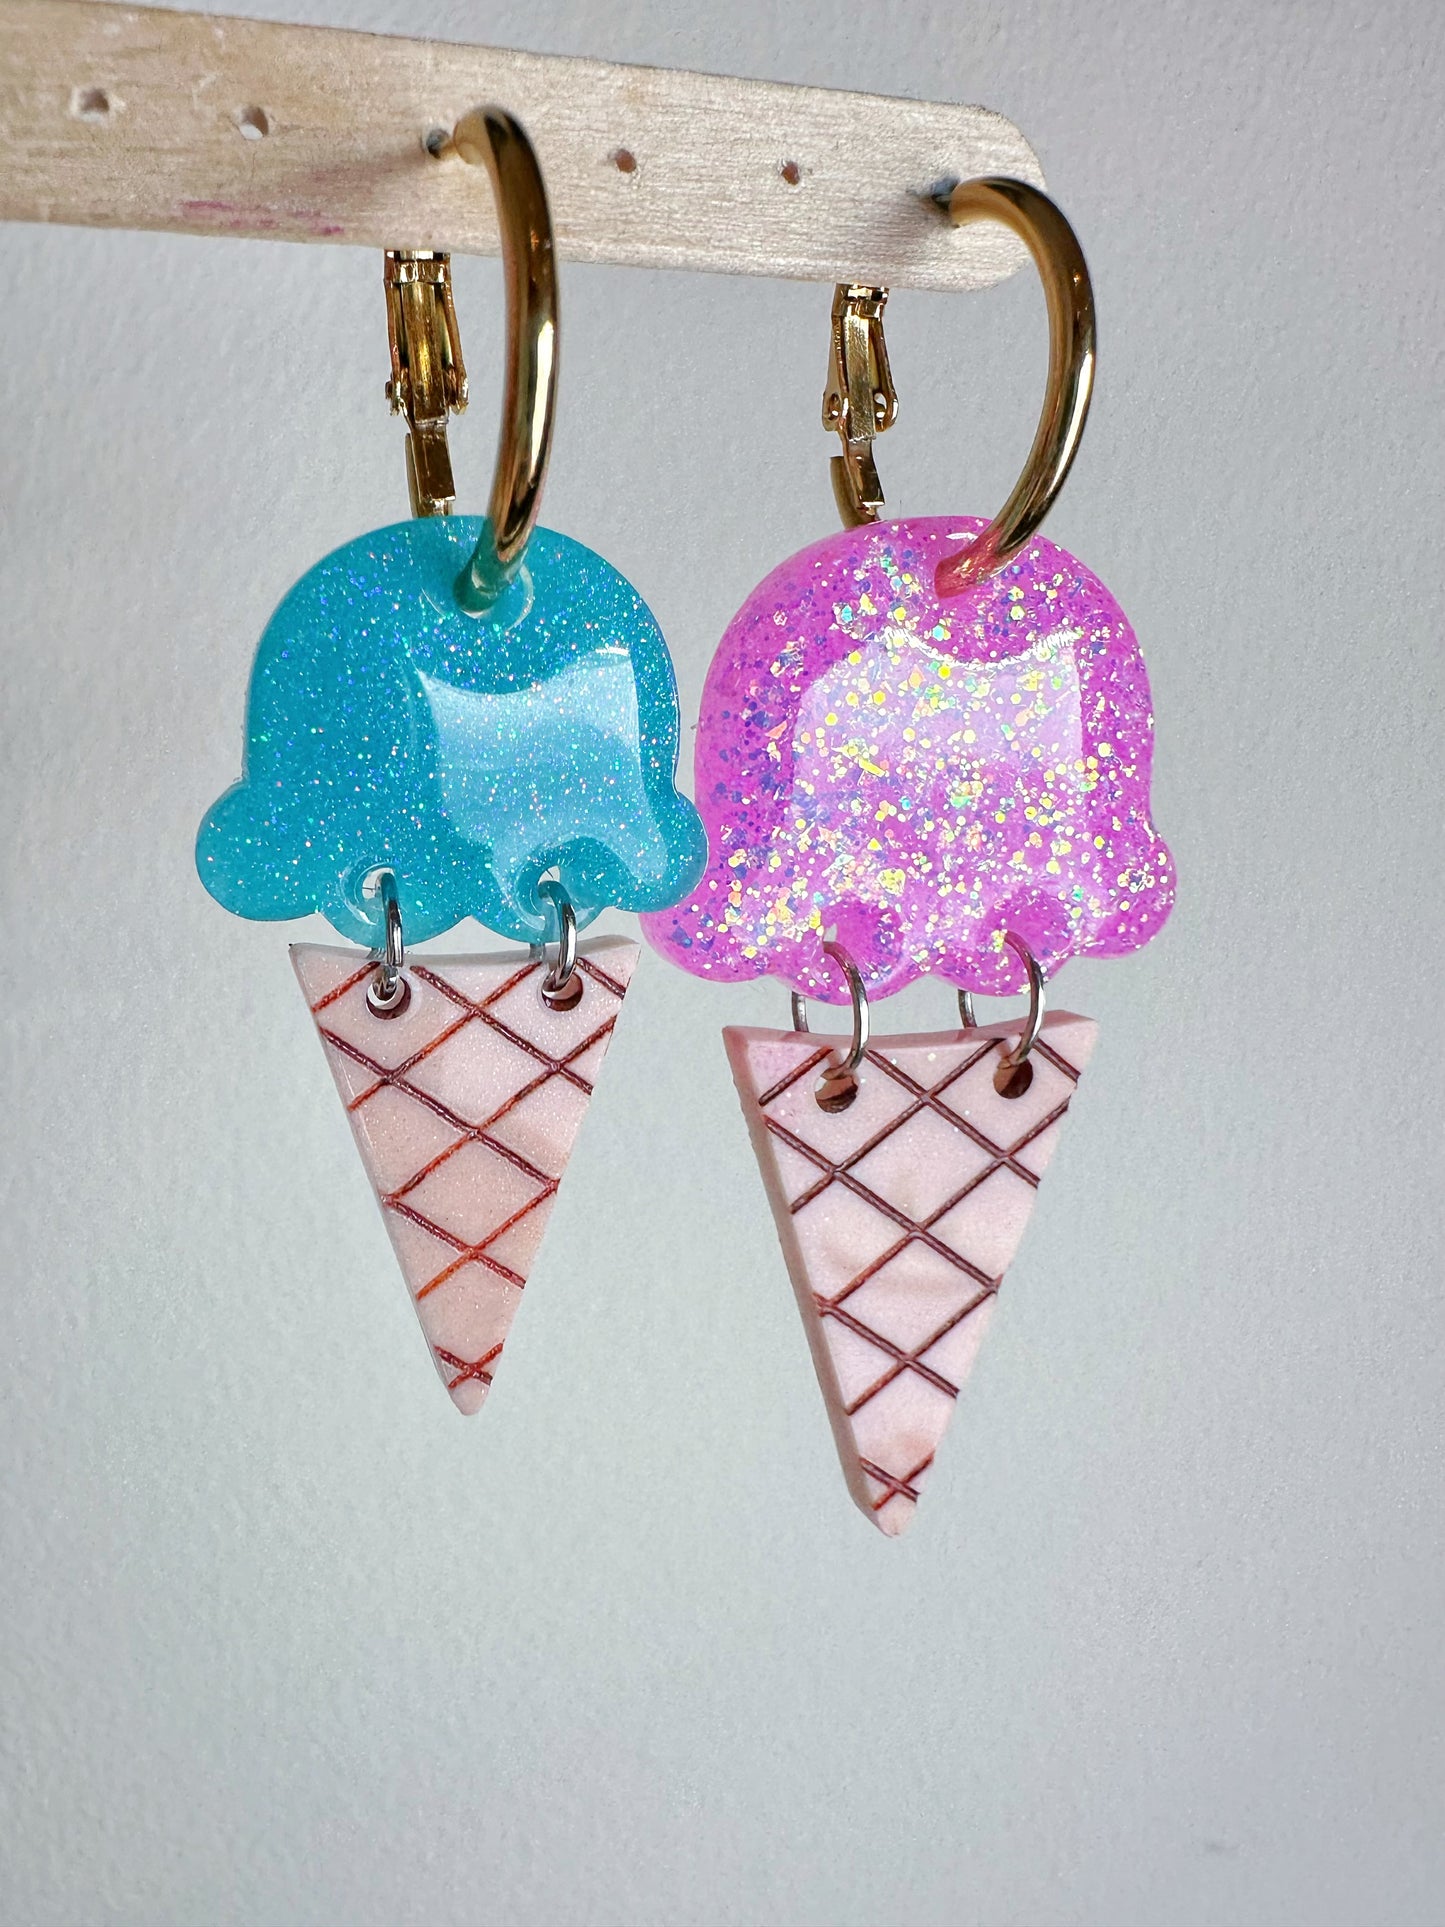 Predomed Two-part Ice Cream Scoop Cone Dangle Earring Hoop Charm Mold